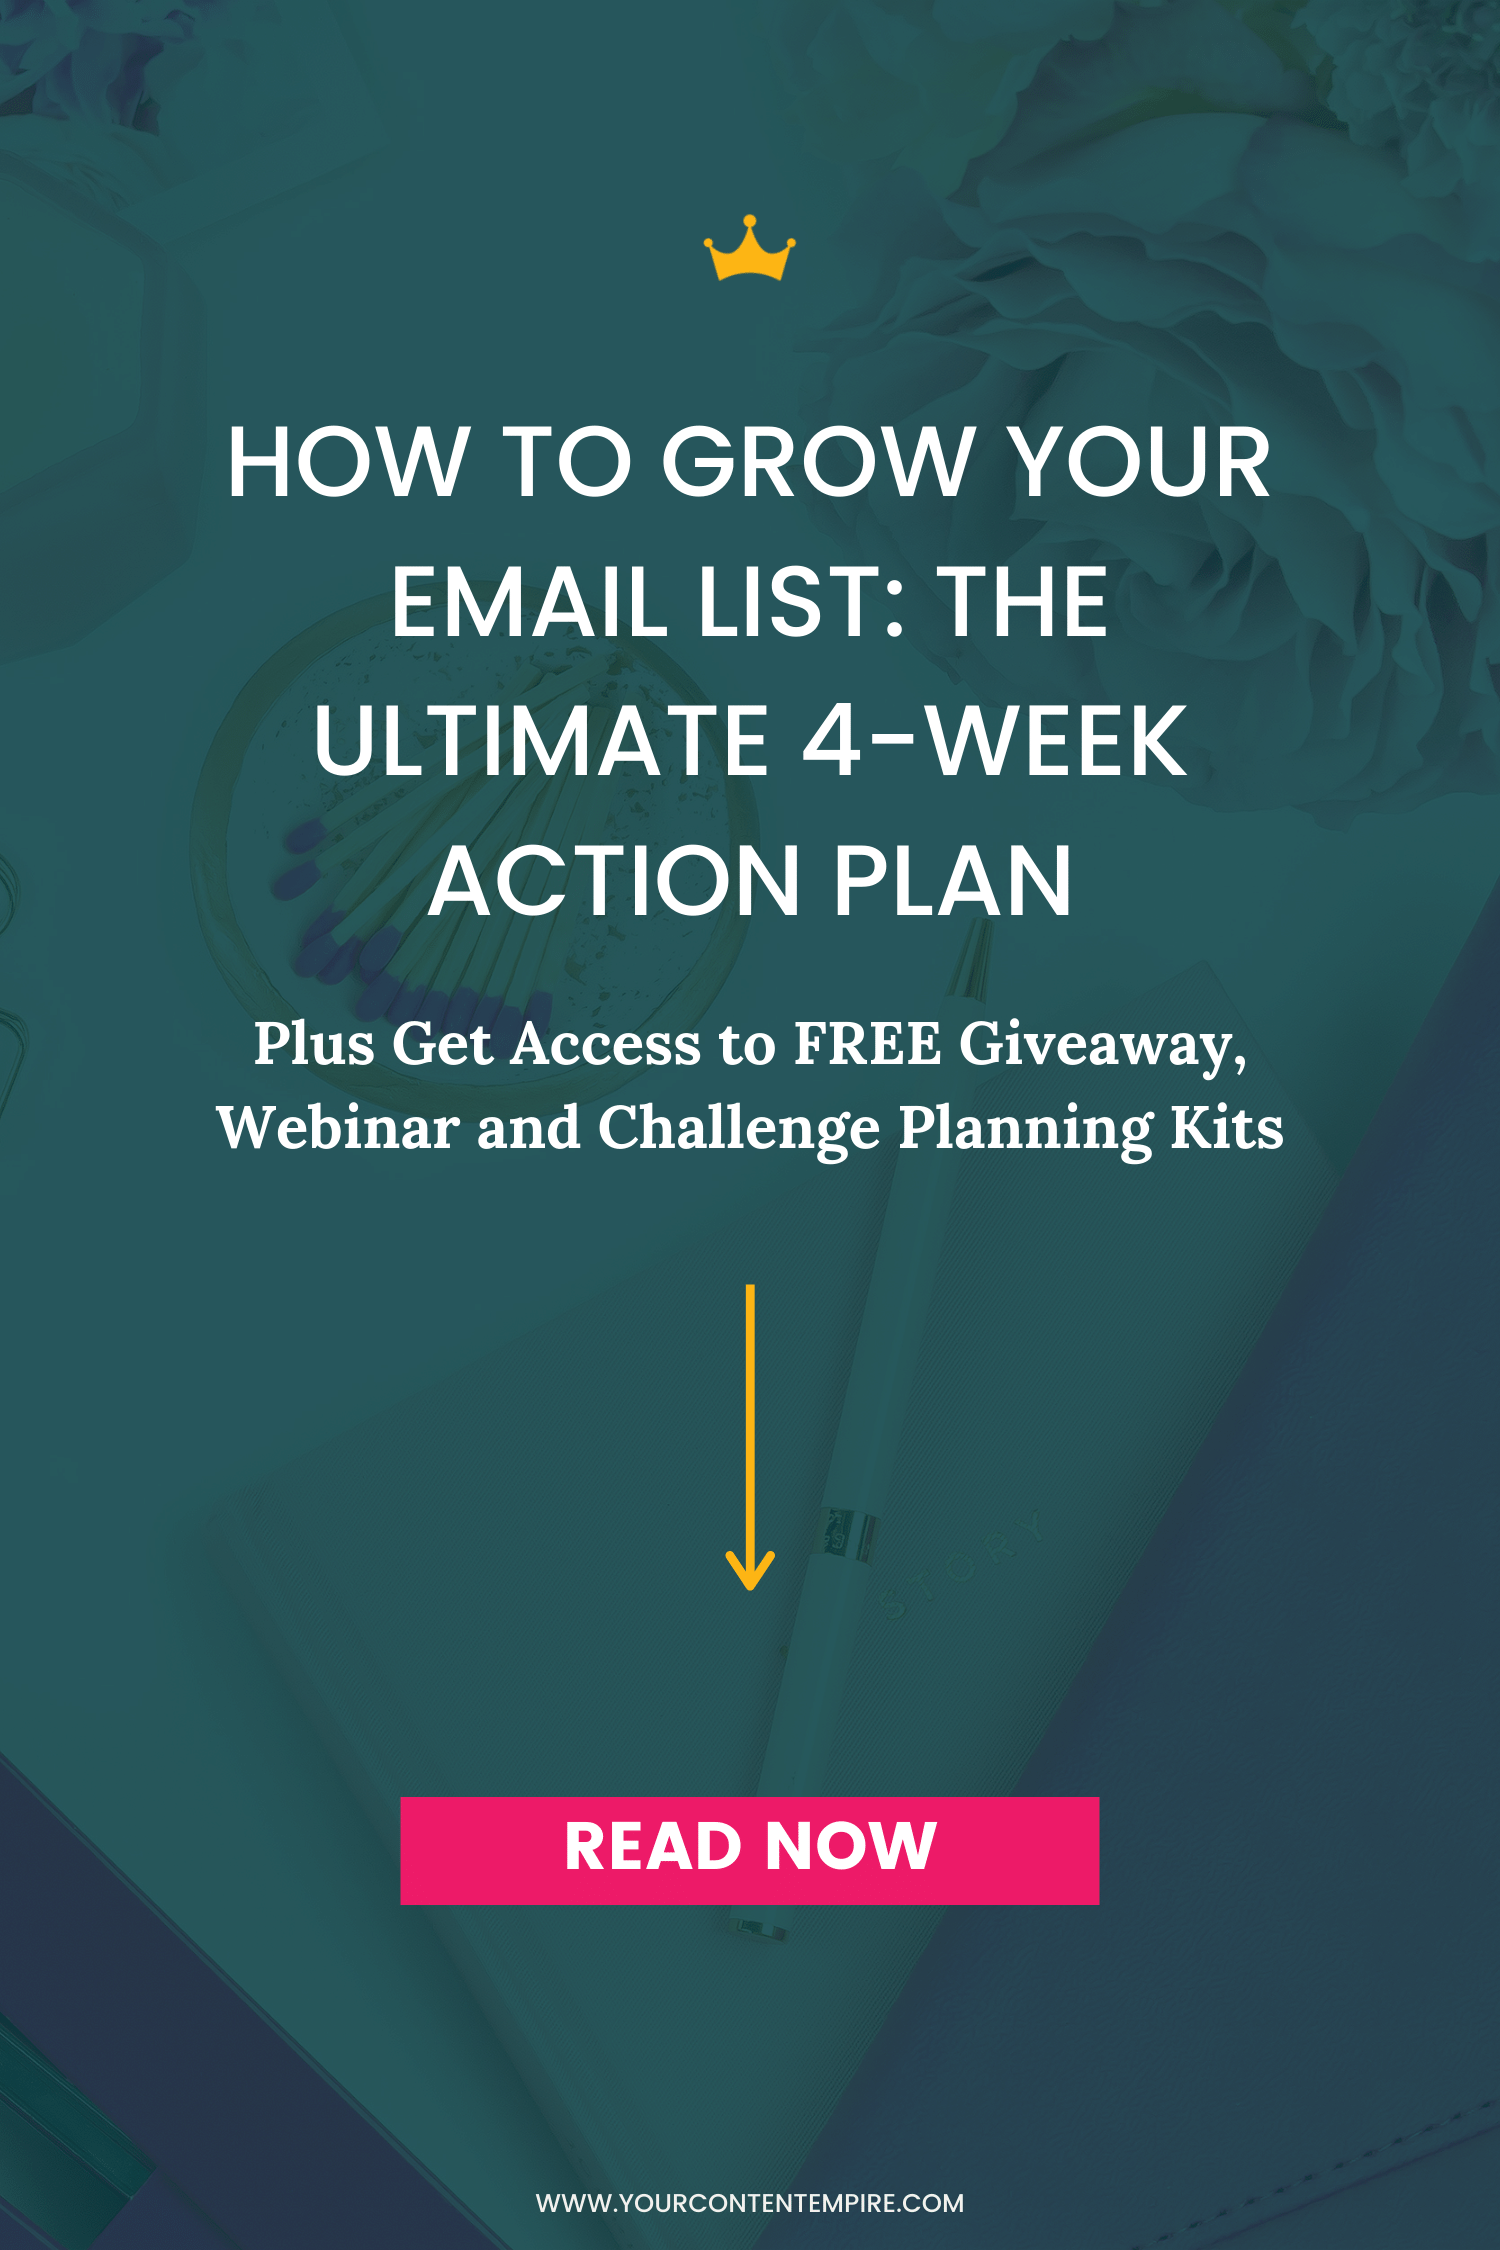 How to Grow Your Email List: The Ultimate 4-Week Action Plan